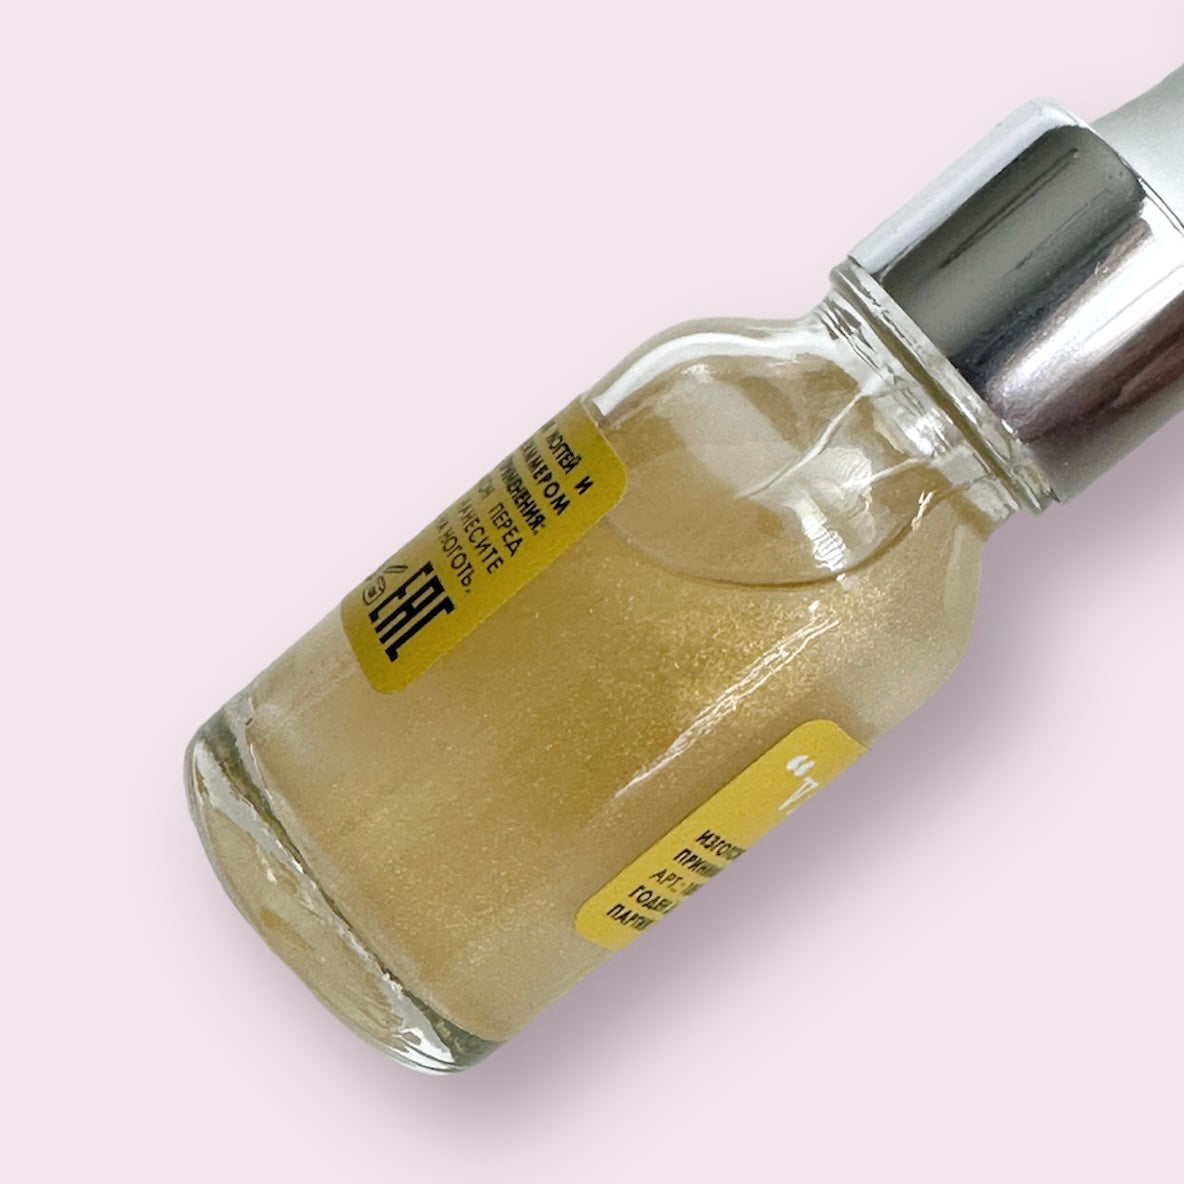 VANILLA Dry Nail Oil with Shimmer